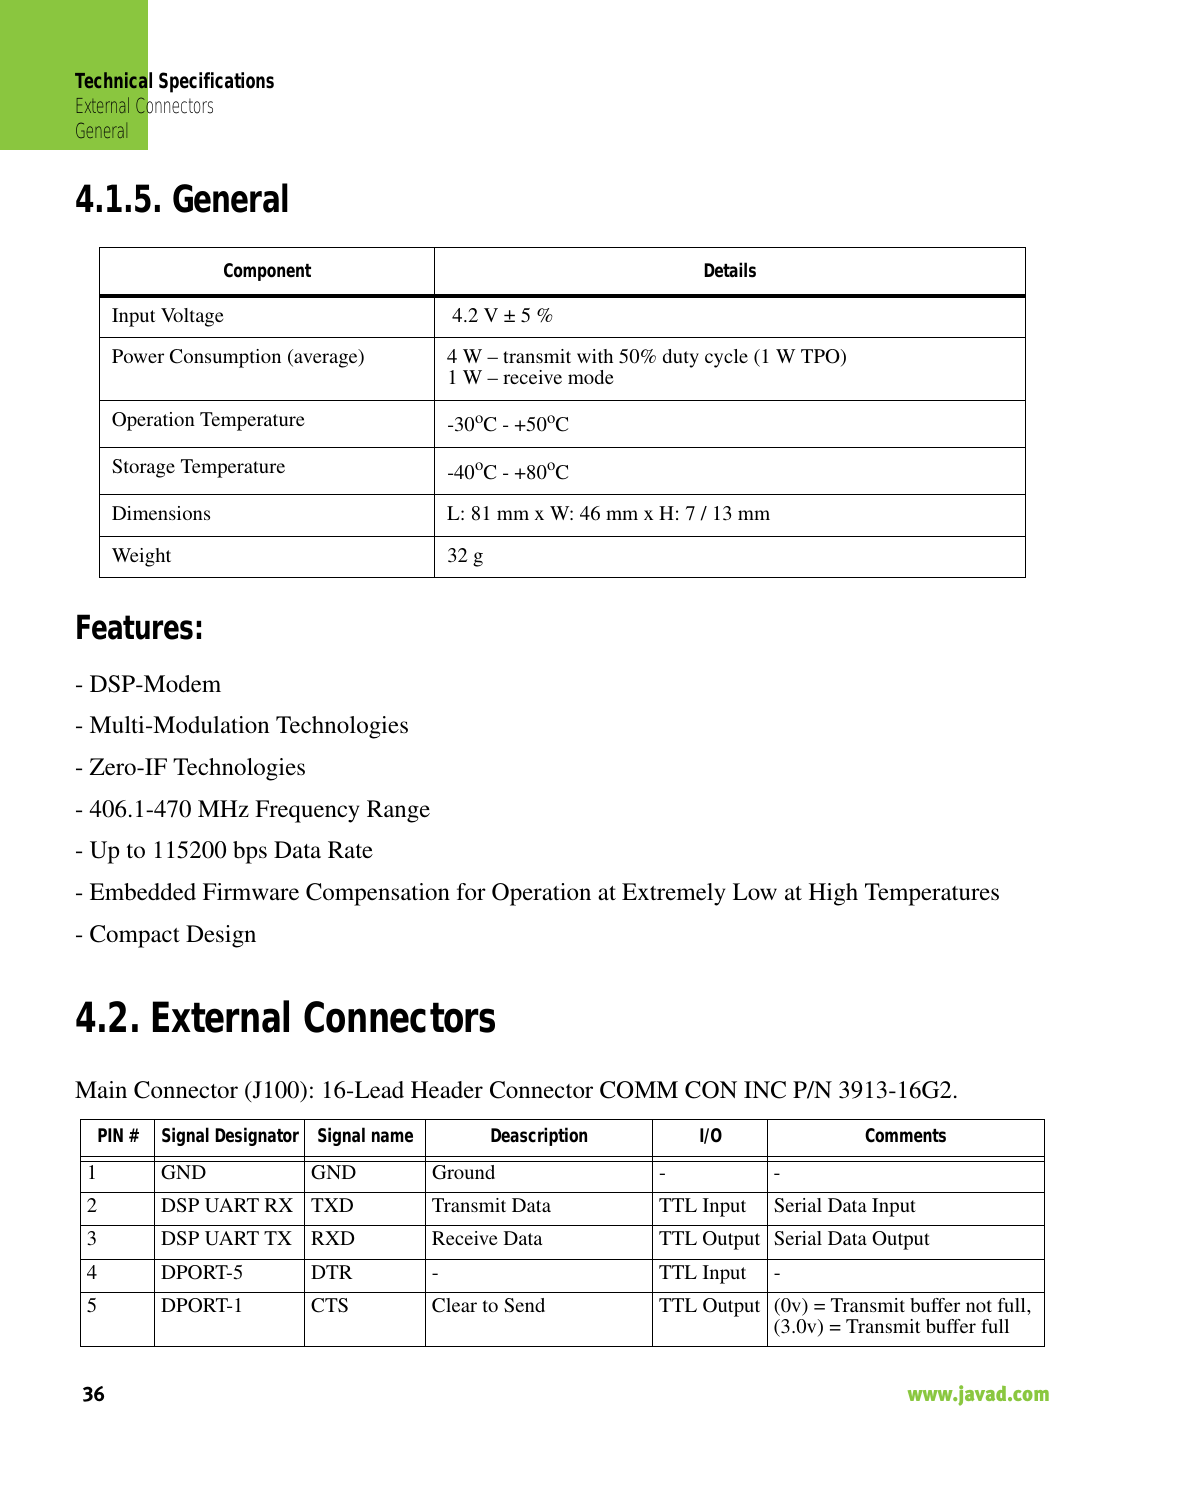 Technical SpecificationsExternal ConnectorsGeneral36                                                                                                                     www.javad.com4.1.5. GeneralFeatures:- DSP-Modem- Multi-Modulation Technologies- Zero-IF Technologies- 406.1-470 MHz Frequency Range- Up to 115200 bps Data Rate- Embedded Firmware Compensation for Operation at Extremely Low at High Temperatures- Compact Design4.2. External ConnectorsMain Connector (J100): 16-Lead Header Connector COMM CON INC P/N 3913-16G2.Component  DetailsInput Voltage  4.2 V ± 5 %Power Consumption (average)  4 W – transmit with 50% duty cycle (1 W TPO)1 W – receive modeOperation Temperature  -30oC - +50oCStorage Temperature -40oC - +80oCDimensions  L: 81 mm x W: 46 mm x H: 7 / 13 mmWeight 32 gPIN # Signal Designator Signal name Deascription I/O Comments1 GND GND Ground - -2 DSP UART RX TXD Transmit Data TTL Input Serial Data Input3 DSP UART TX RXD Receive Data TTL Output Serial Data Output4 DPORT-5 DTR - TTL Input -5 DPORT-1 CTS Clear to Send TTL Output (0v) = Transmit buffer not full,(3.0v) = Transmit buffer full